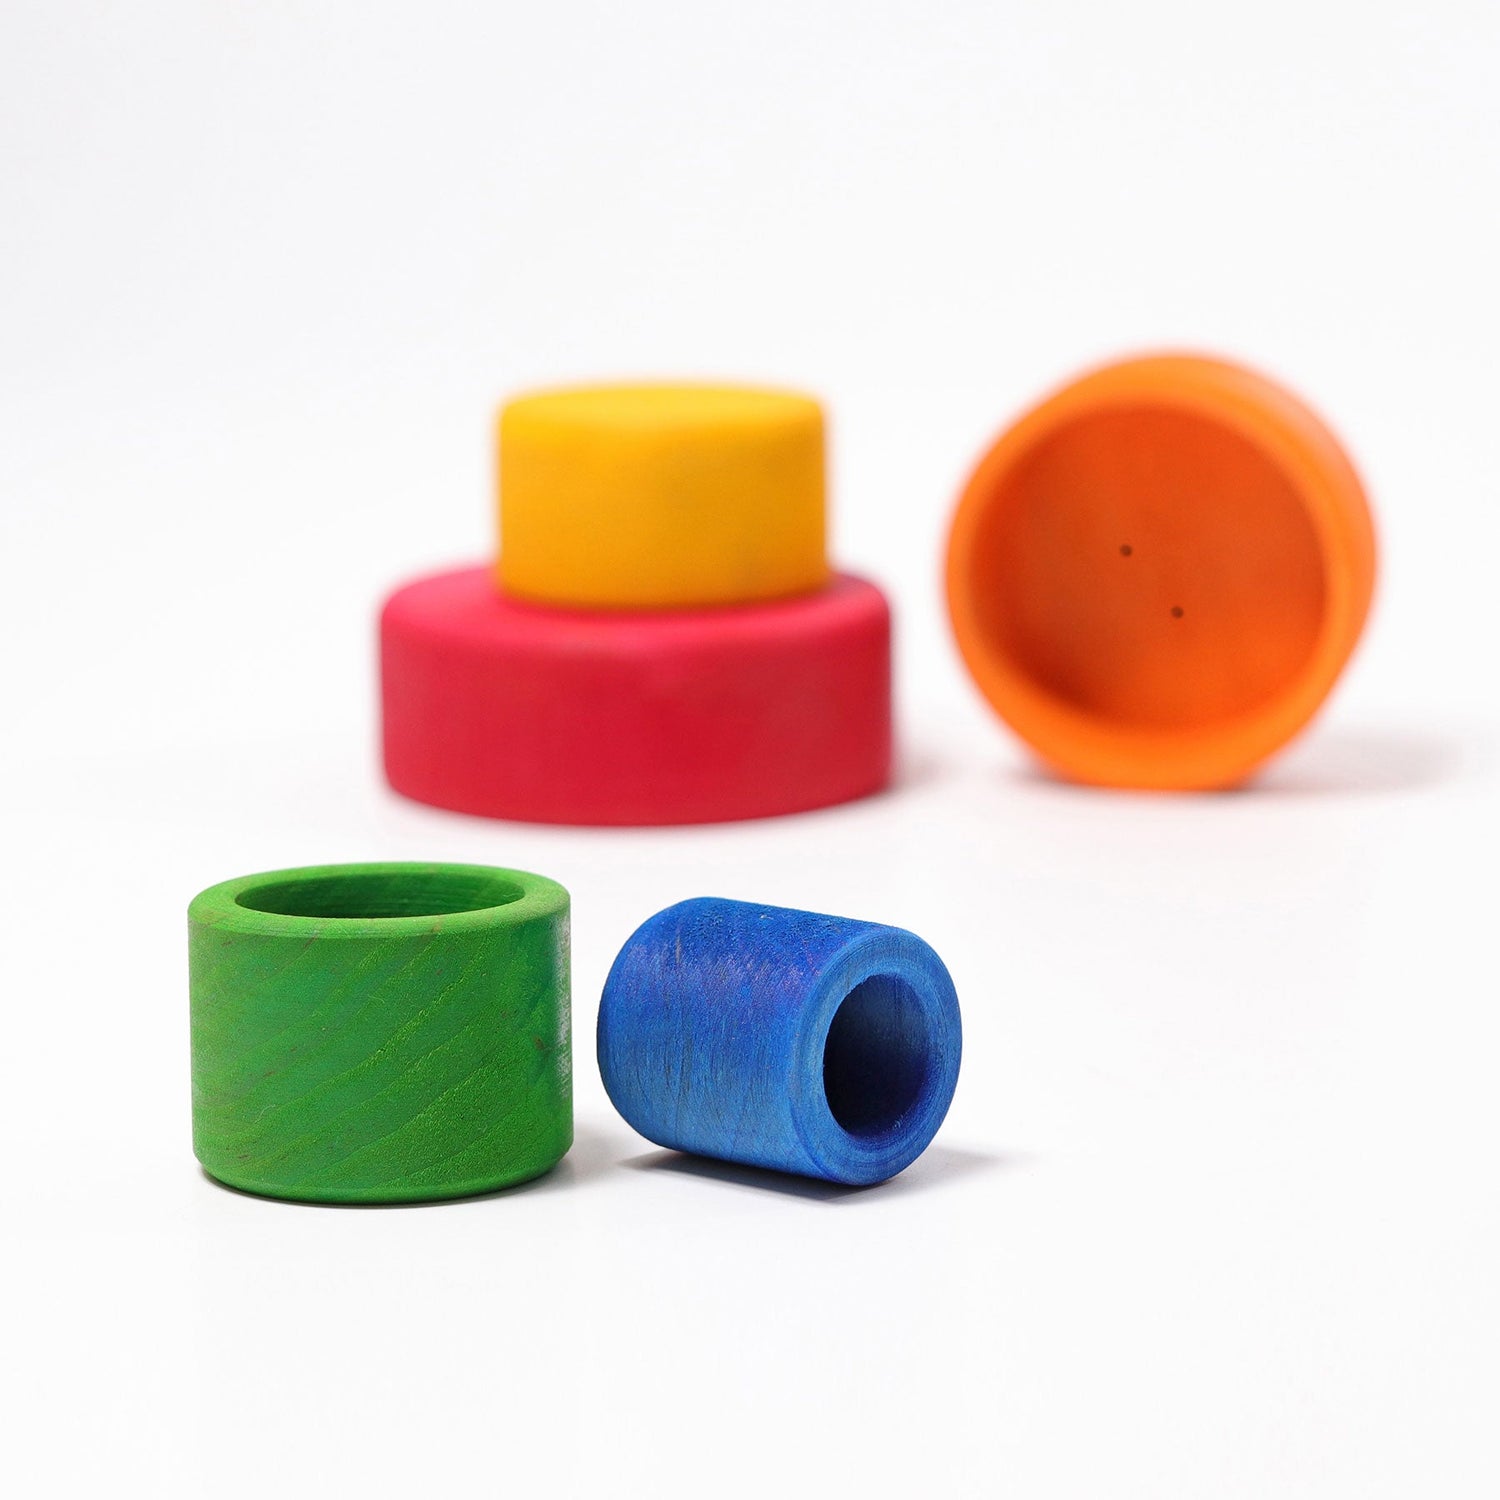 GRIMM'S | STACKING BOWLS - RED by GRIMM'S WOODEN TOYS - The Playful Collective